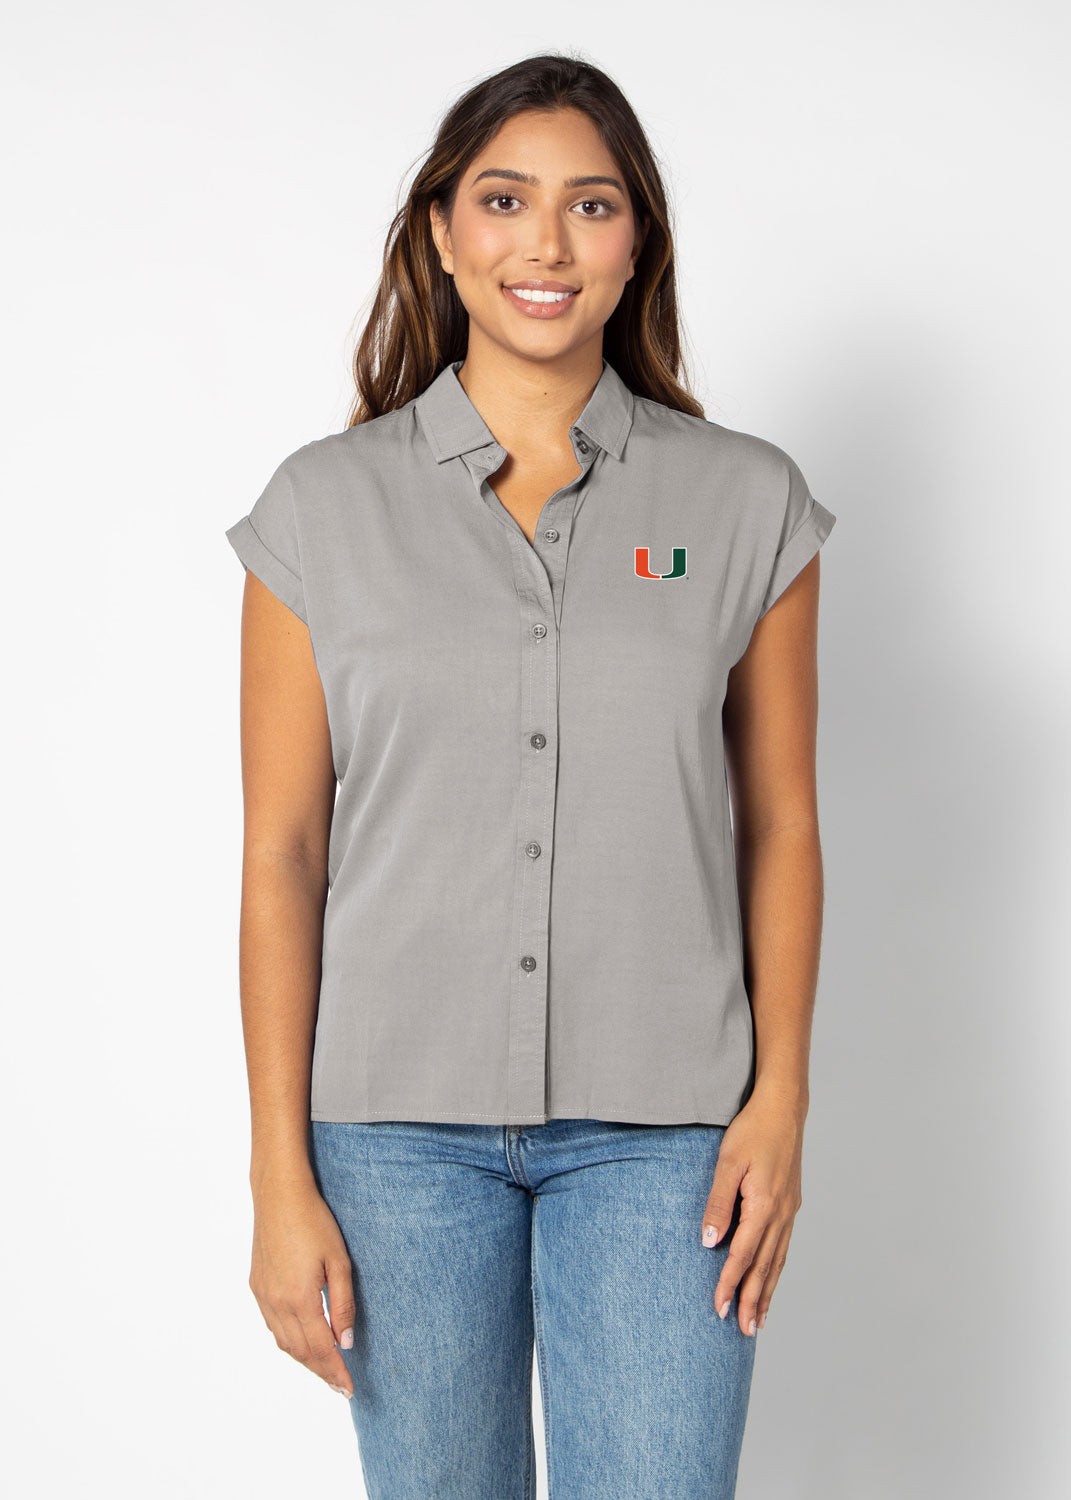 Miami Hurricanes Women's Embroidered U Short Sleeve Button-Up Shirt - Grey